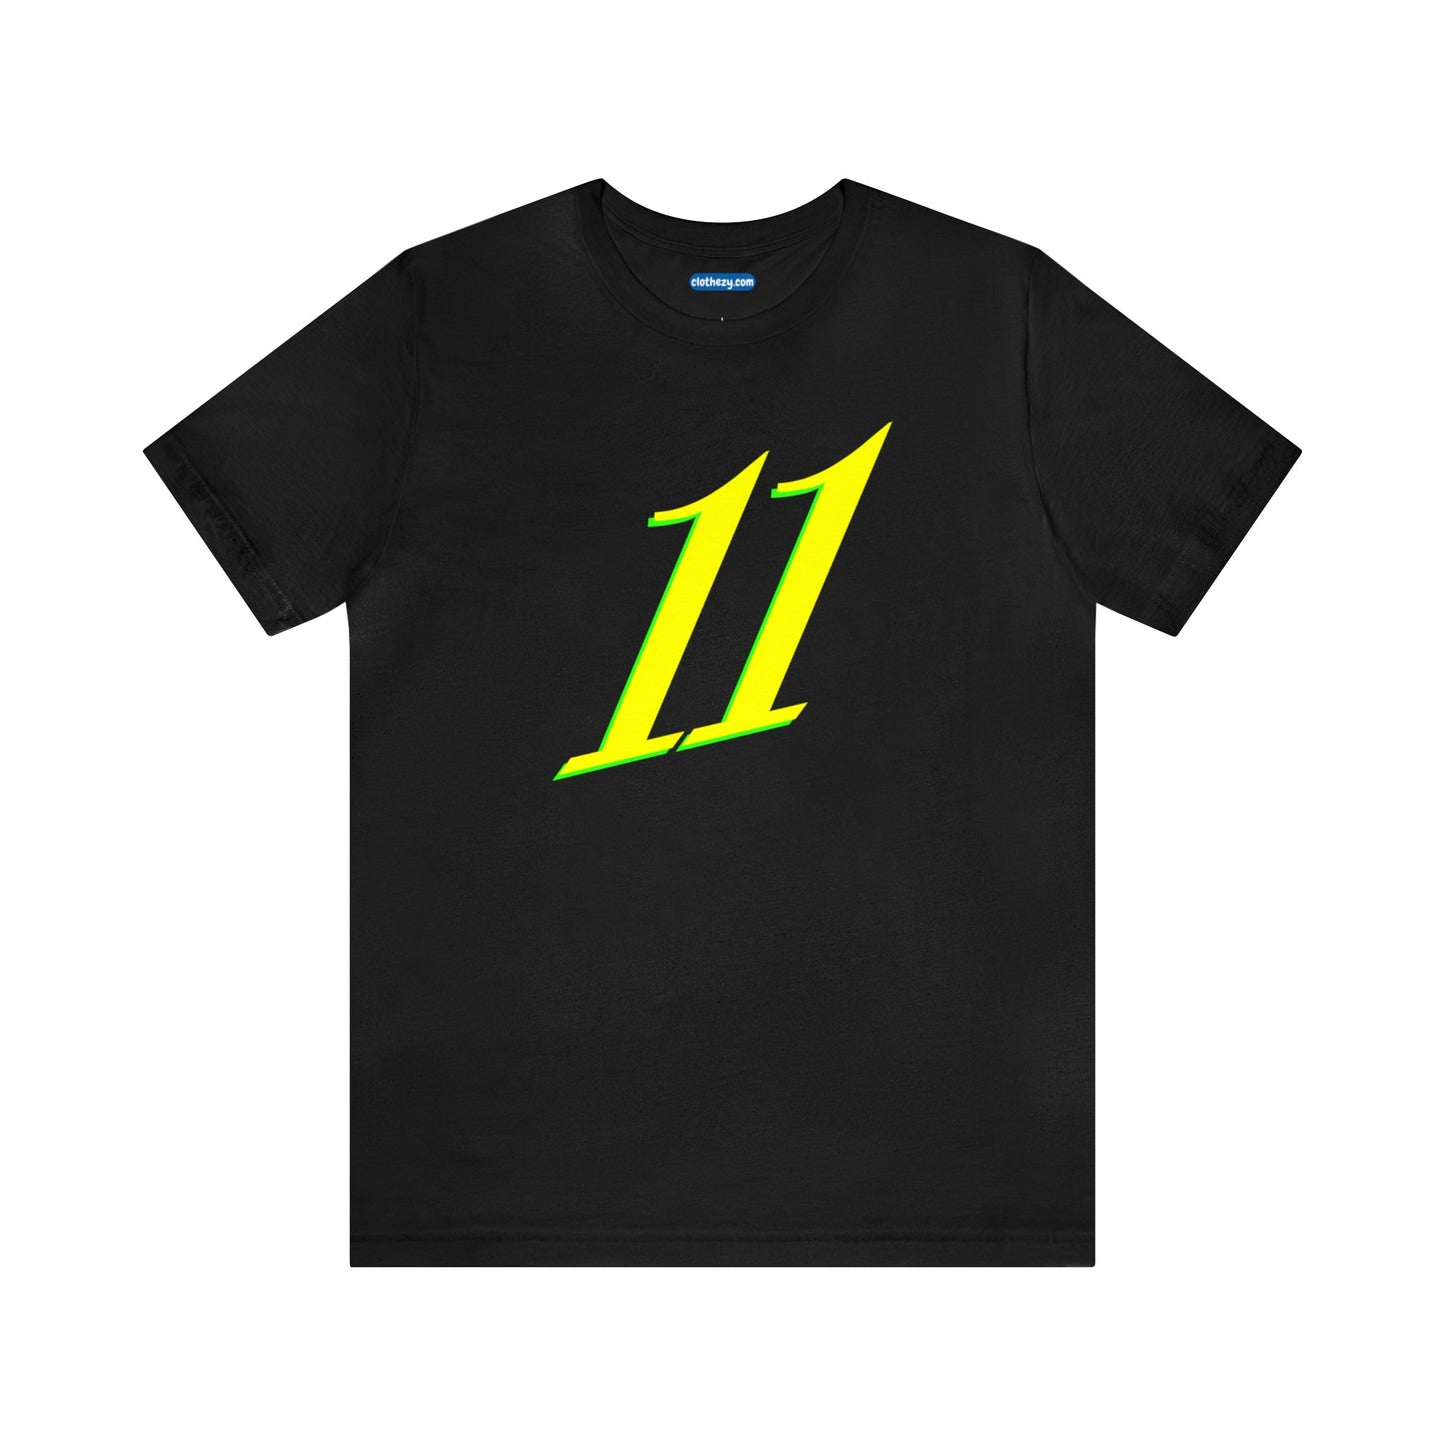 Number 11 Design - Soft Cotton Tee for birthdays and celebrations, Gift for friends and family, Multiple Options by clothezy.com in Dark Grey Heather Size Small - Buy Now